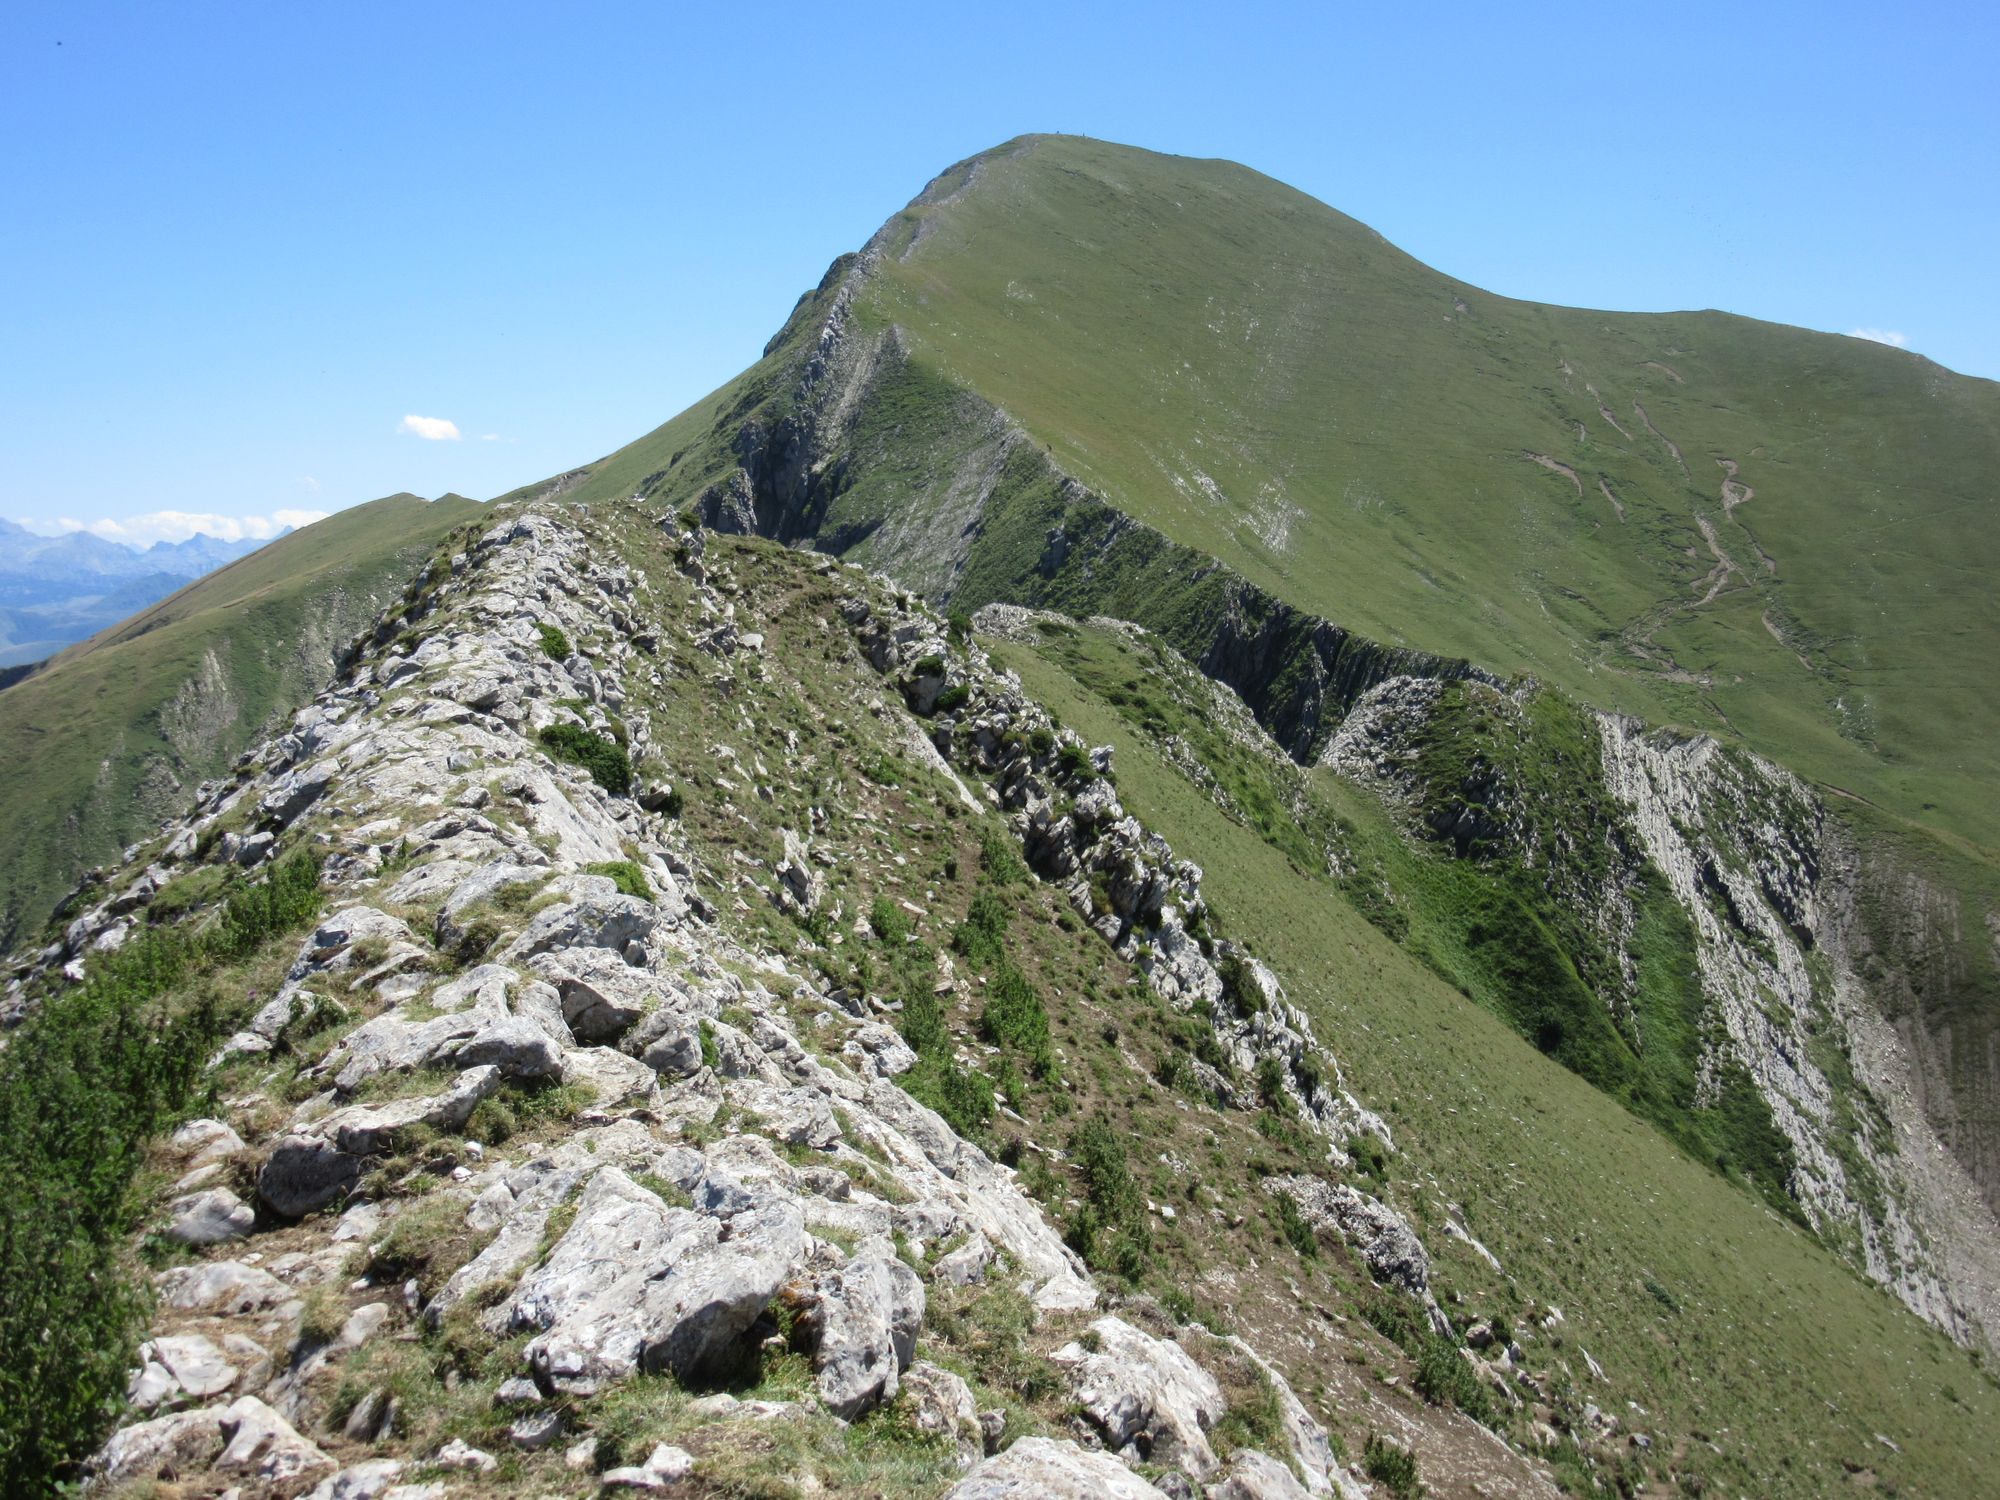 Looking back along the Crête du Zazpignan to Pic d'Orhy.